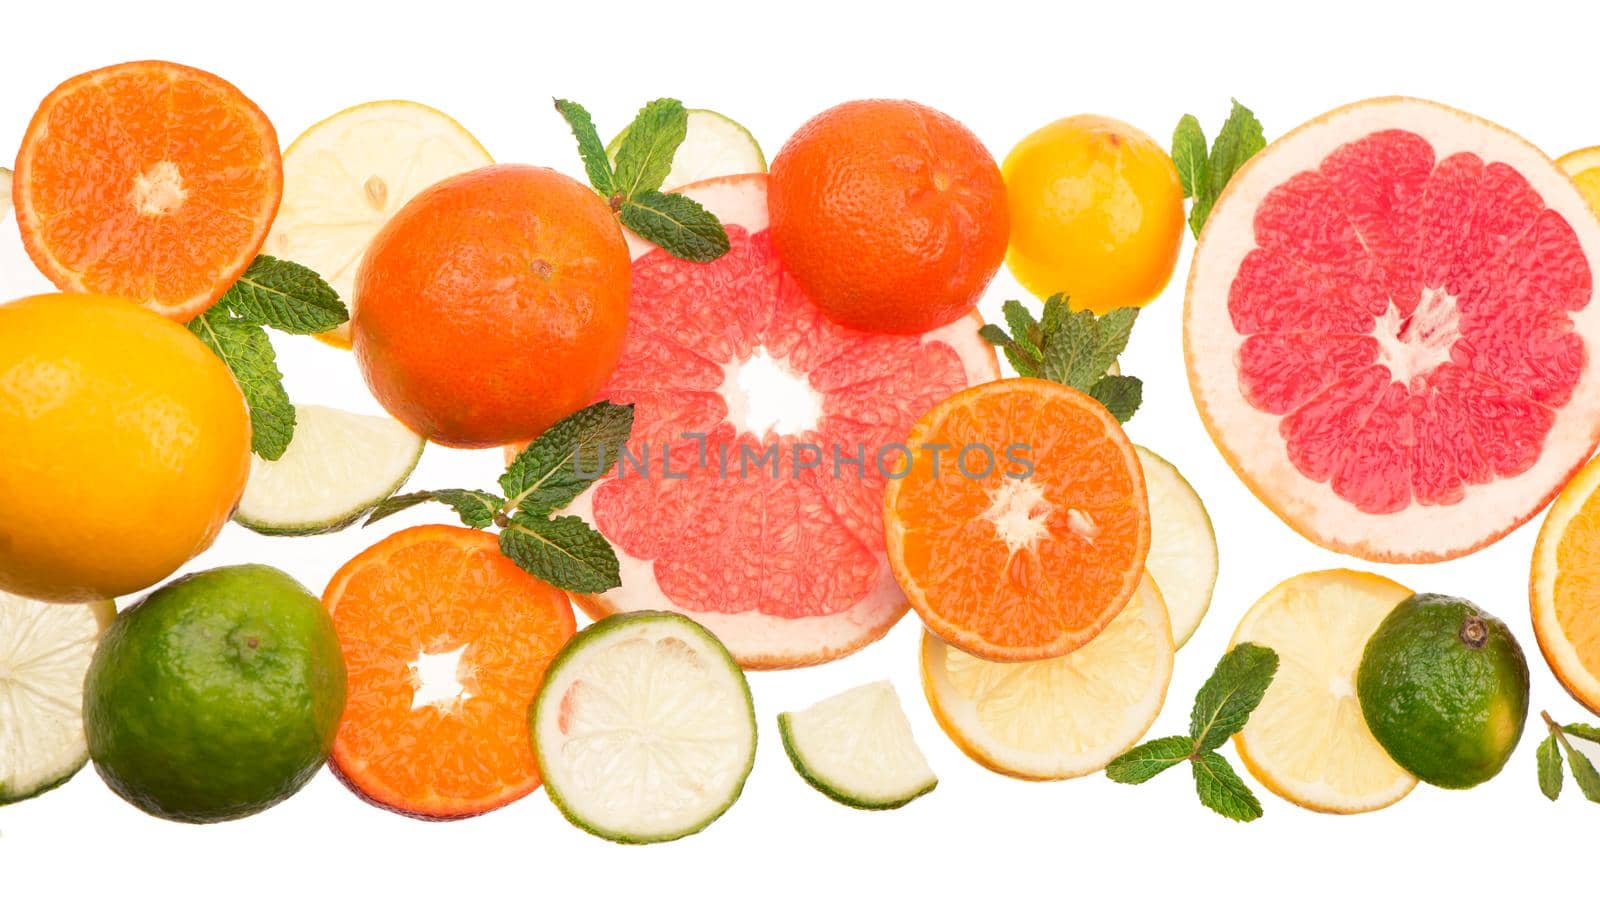 Mixed citrus fruit including lemons, limes, grapefruit, and tangerines with mint sprigs isolated on a white background close up